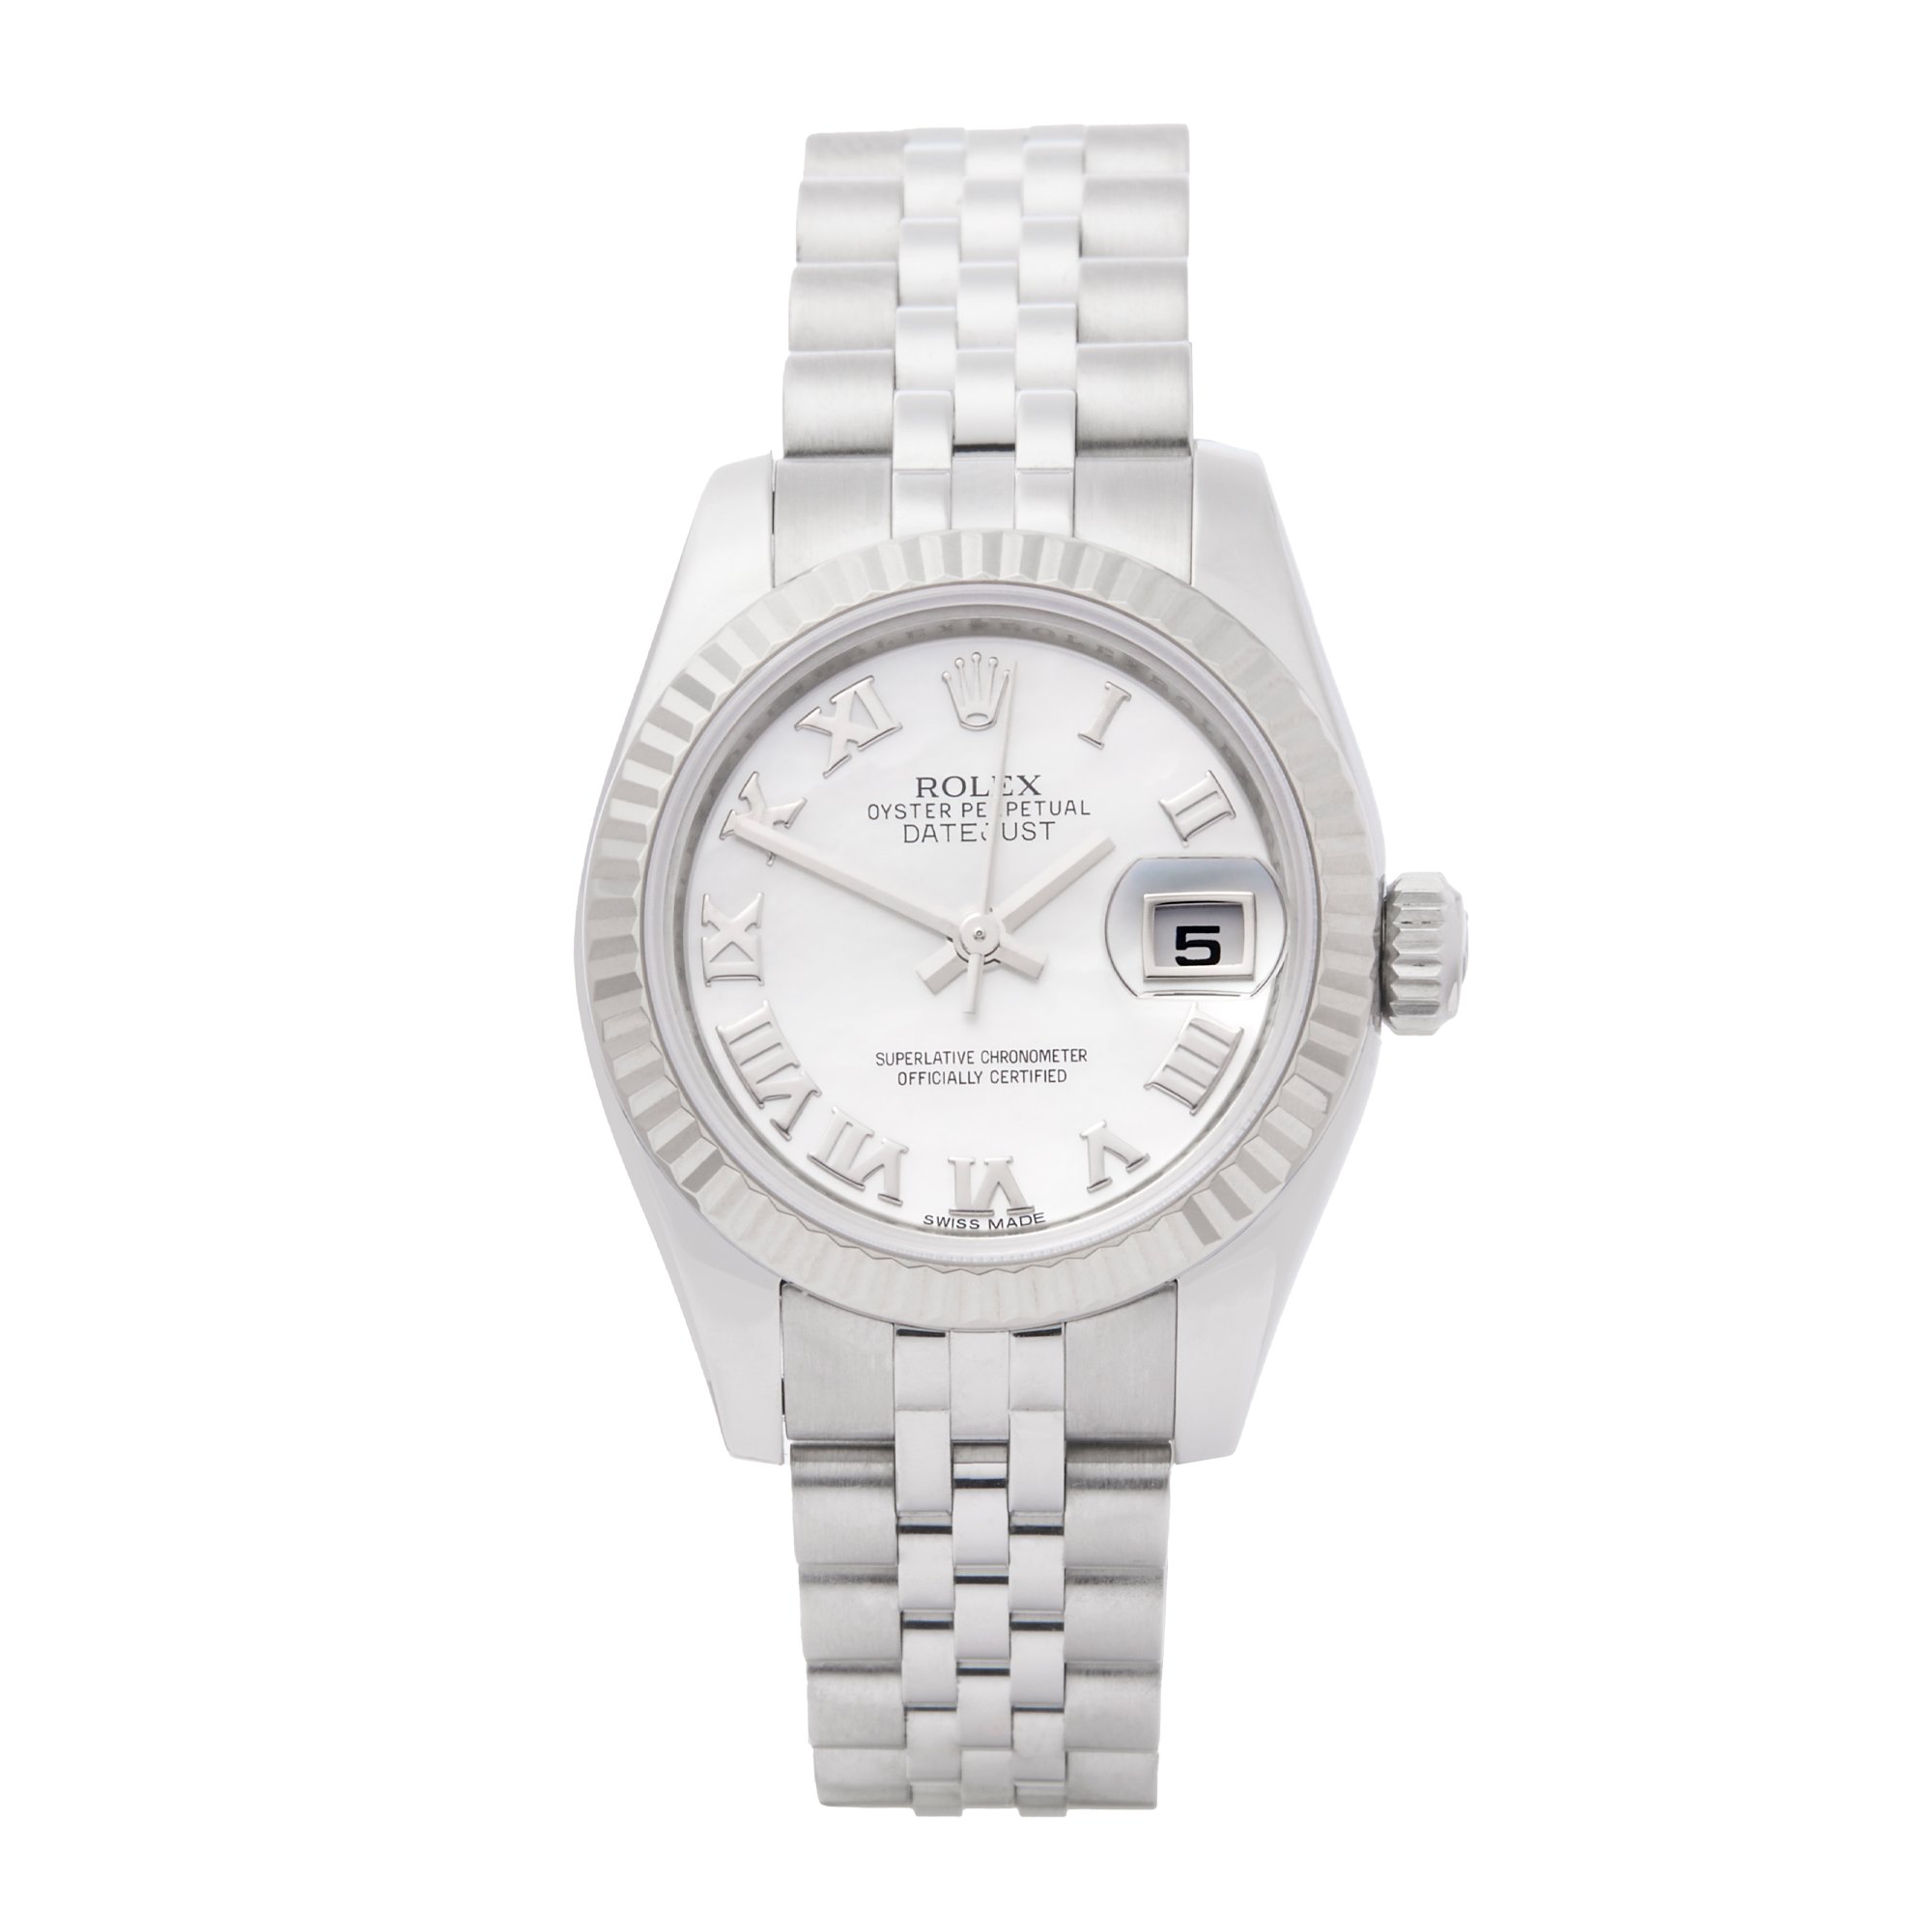 Rolex Datejust 26 Mother Of Pearl White Gold & Stainless Steel 179174